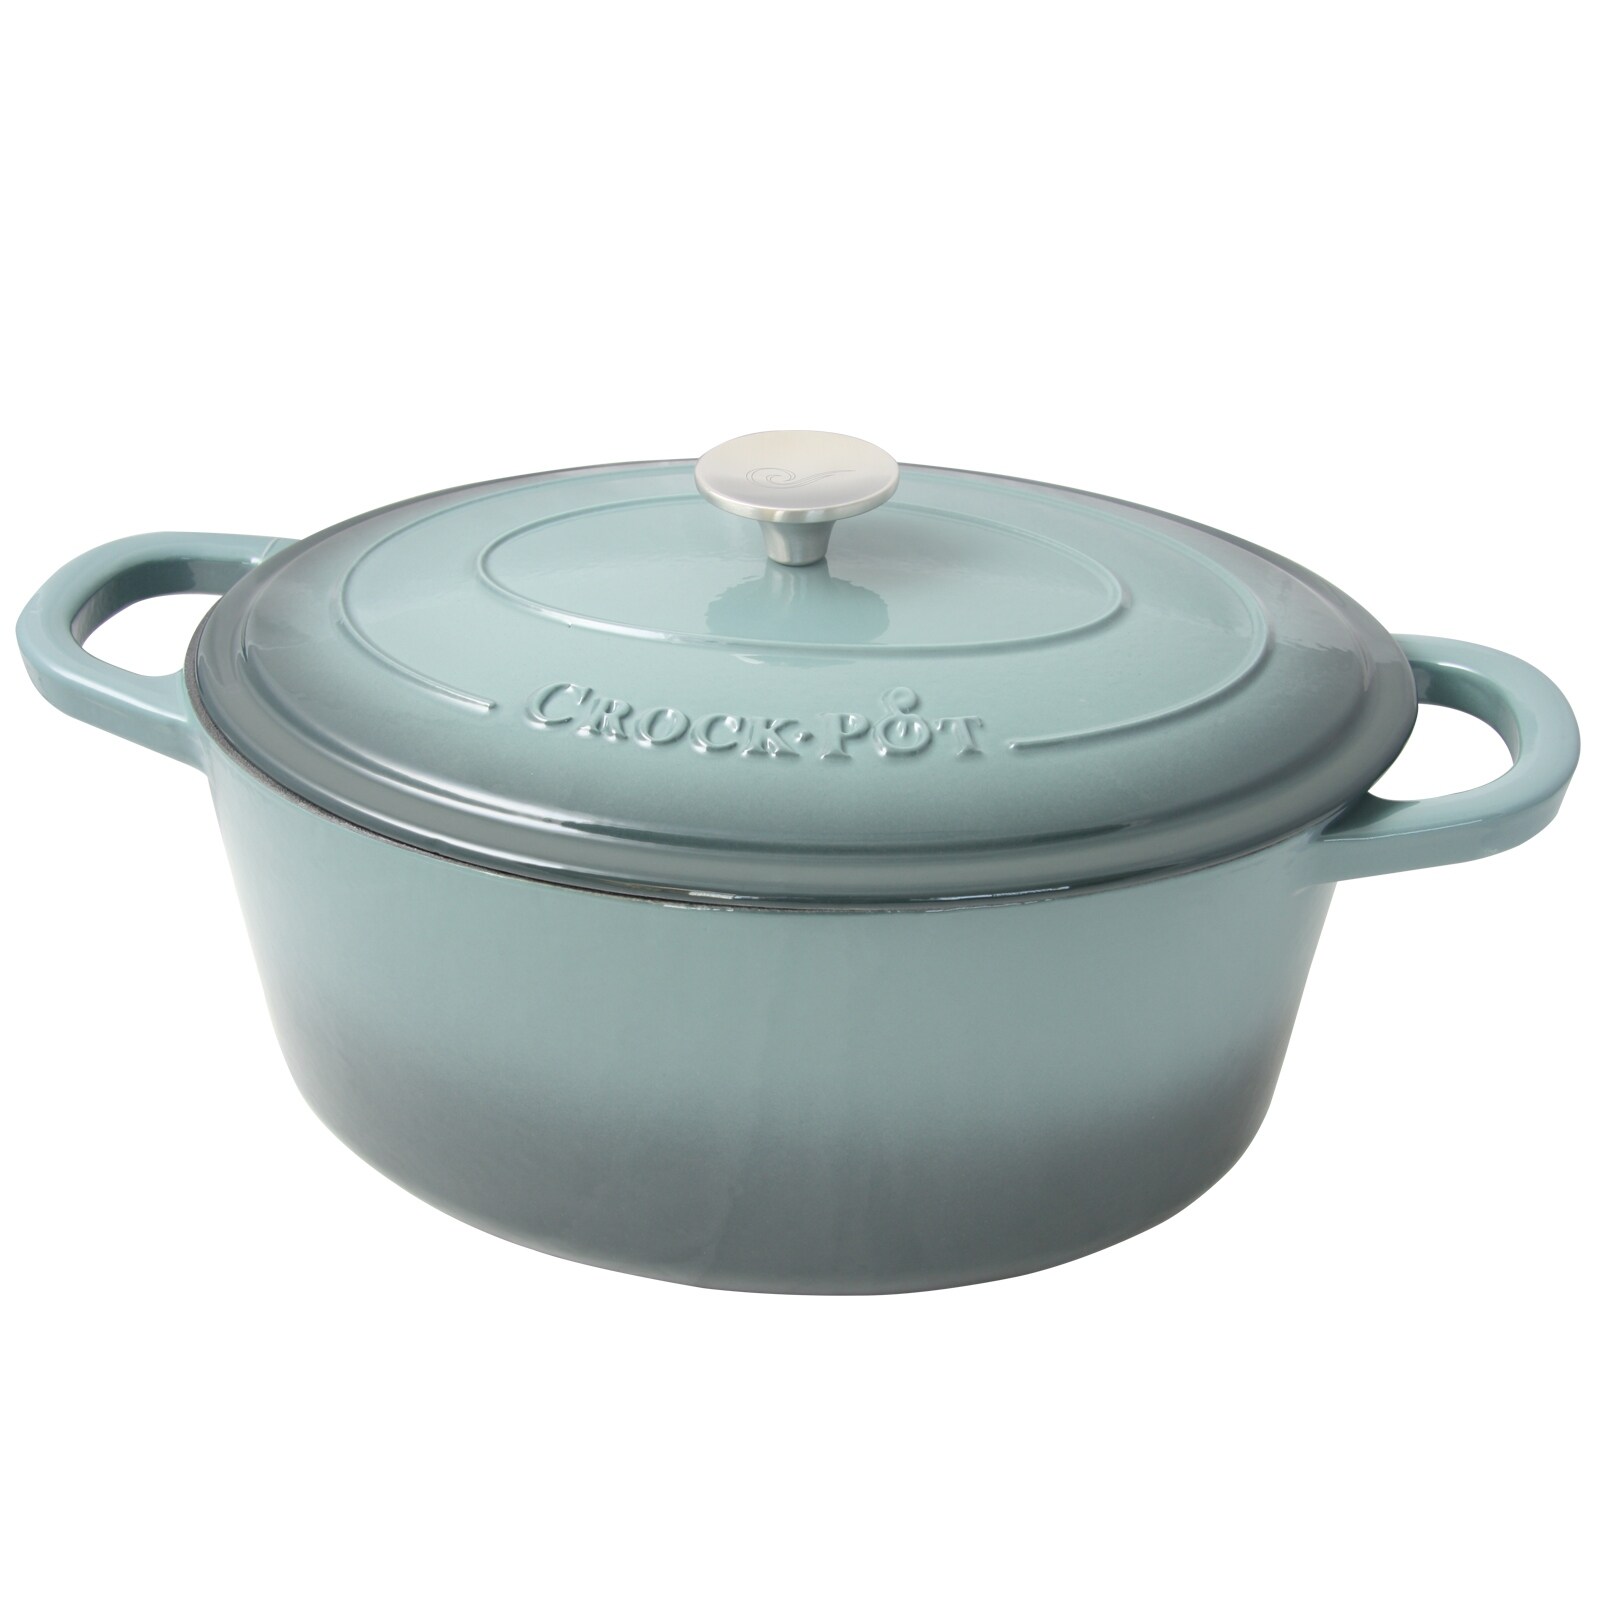 https://ak1.ostkcdn.com/images/products/is/images/direct/58859cd2a8df8f49e7a4f00f985241fec8a2894a/Crock-Pot-Artisan-7-Quart-Enameled-Cast-Iron-Dutch-Oven-Oval-in-Slate-Grey.jpg